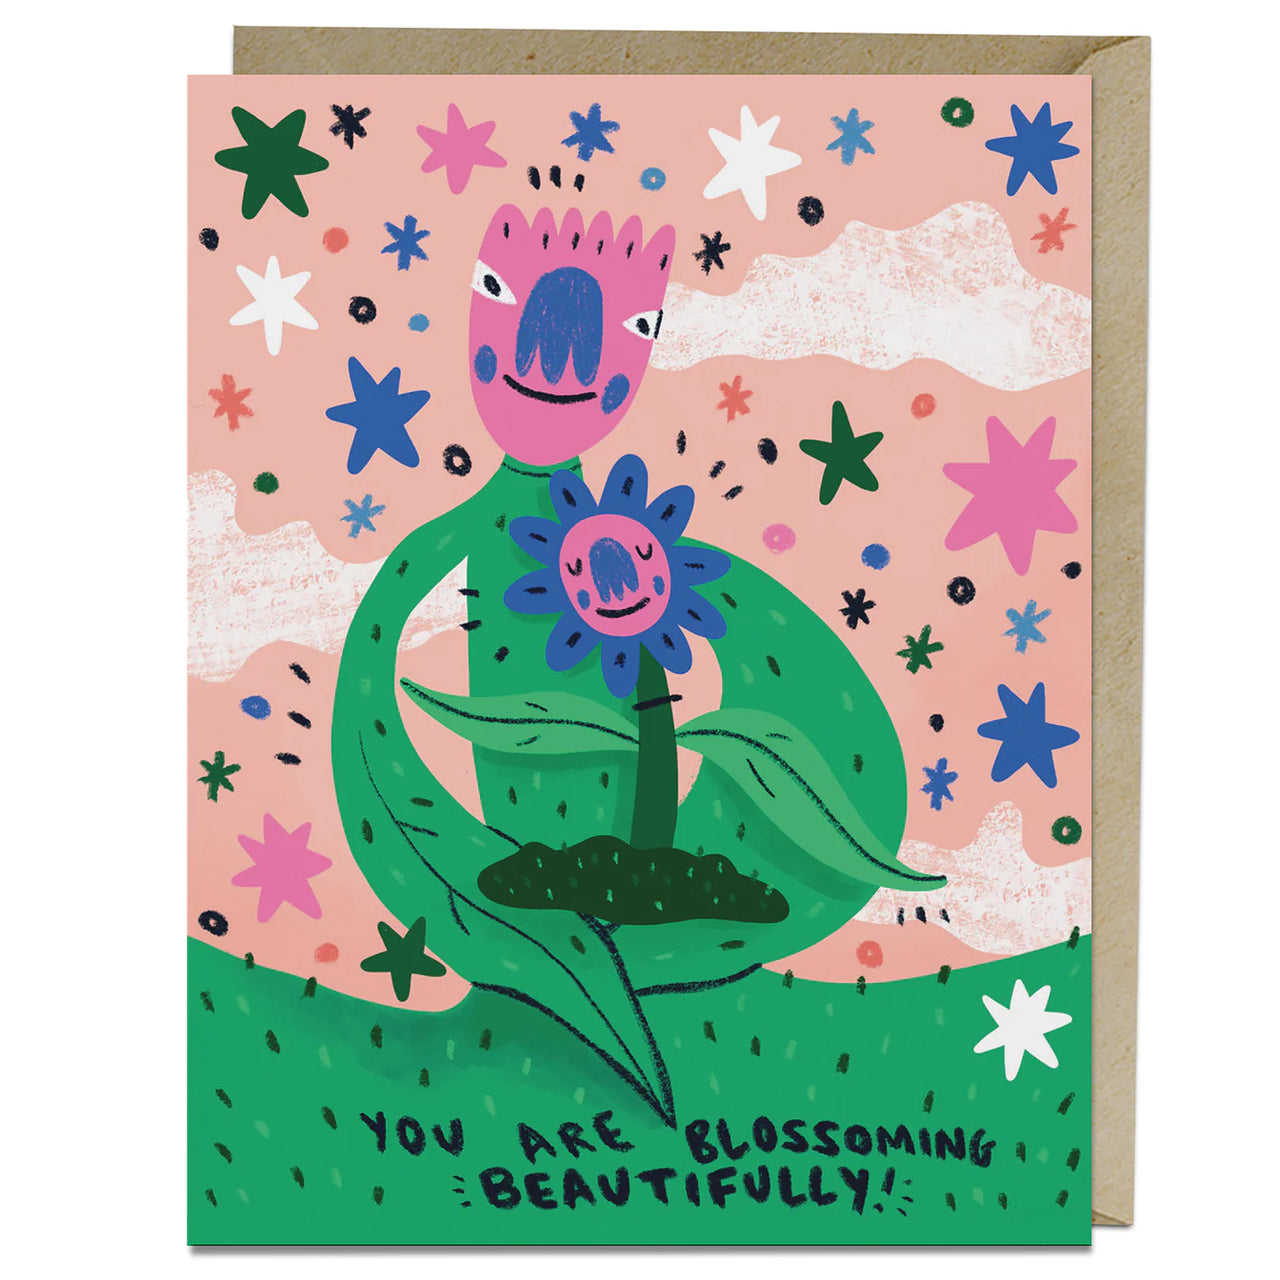 Em & Friends - Barry Lee Blossoming Beautifully Encouragement Card